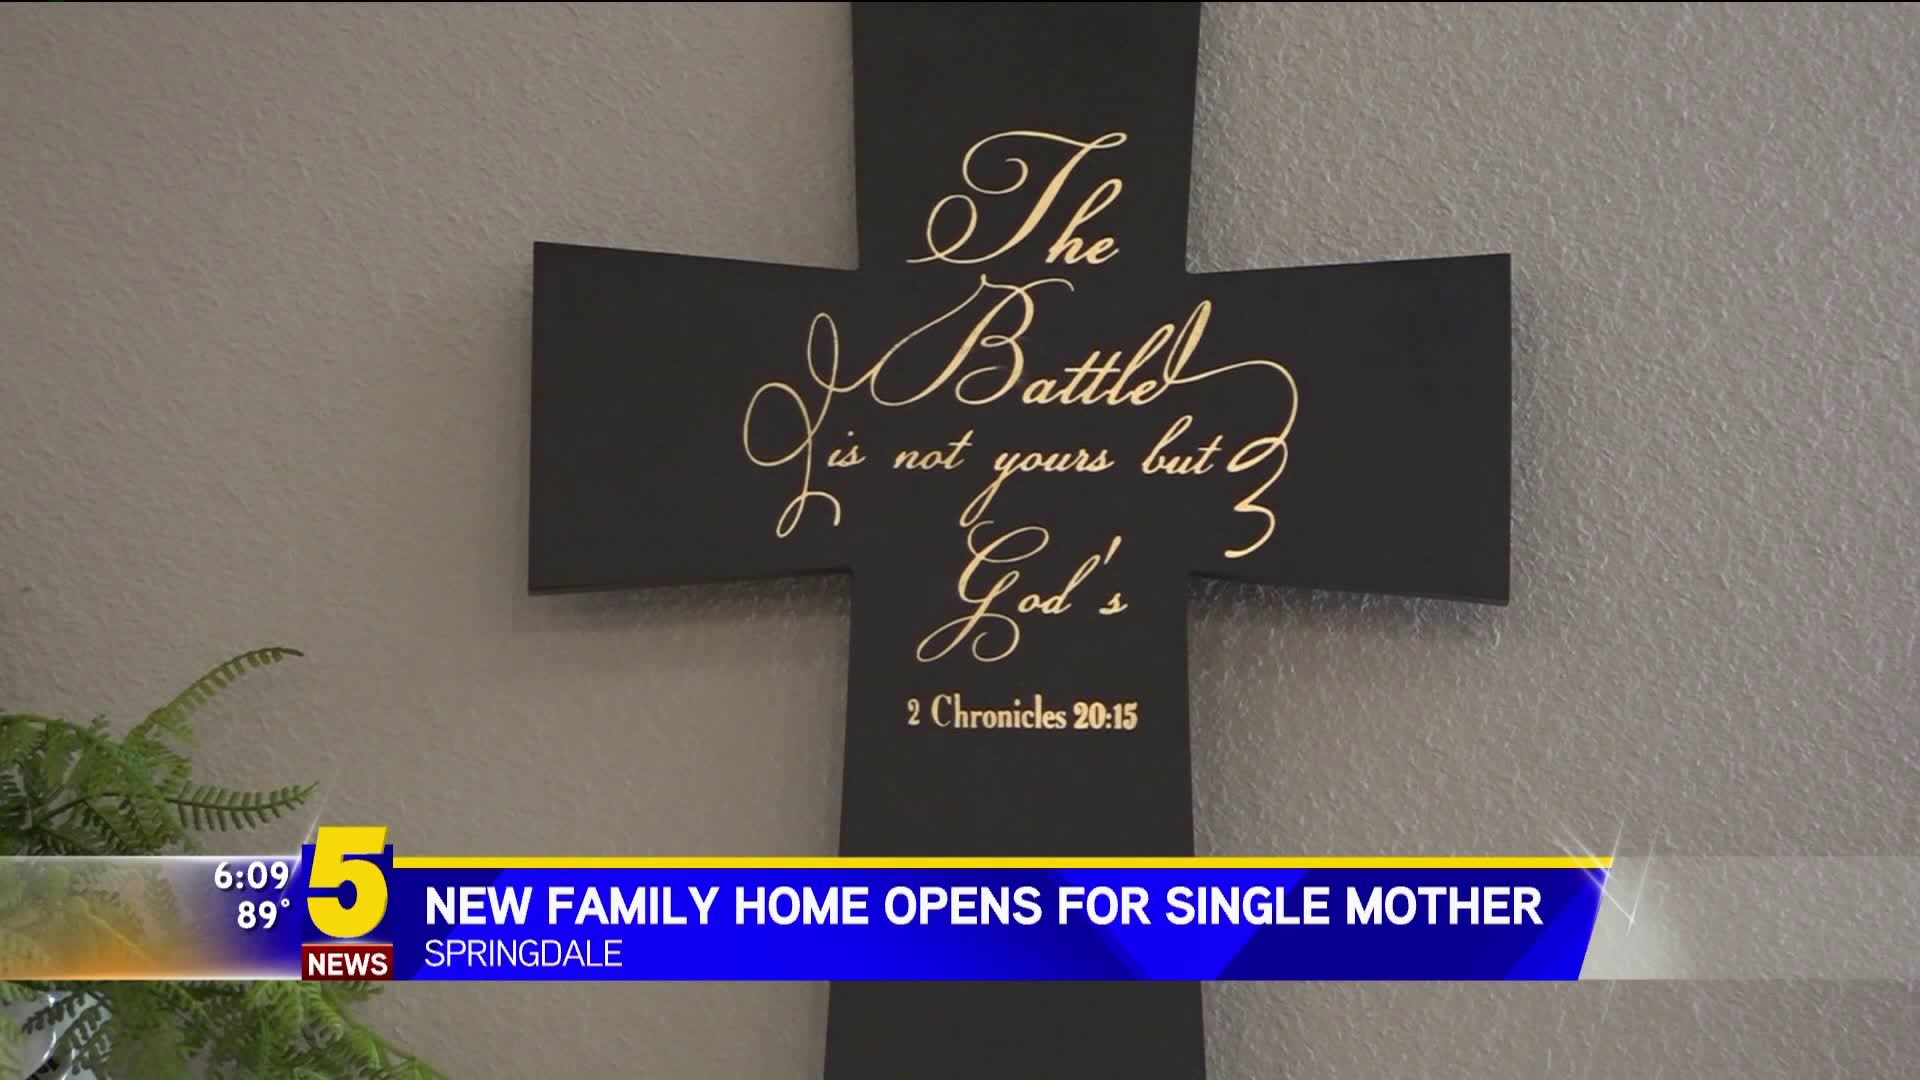 New Family Home Opens